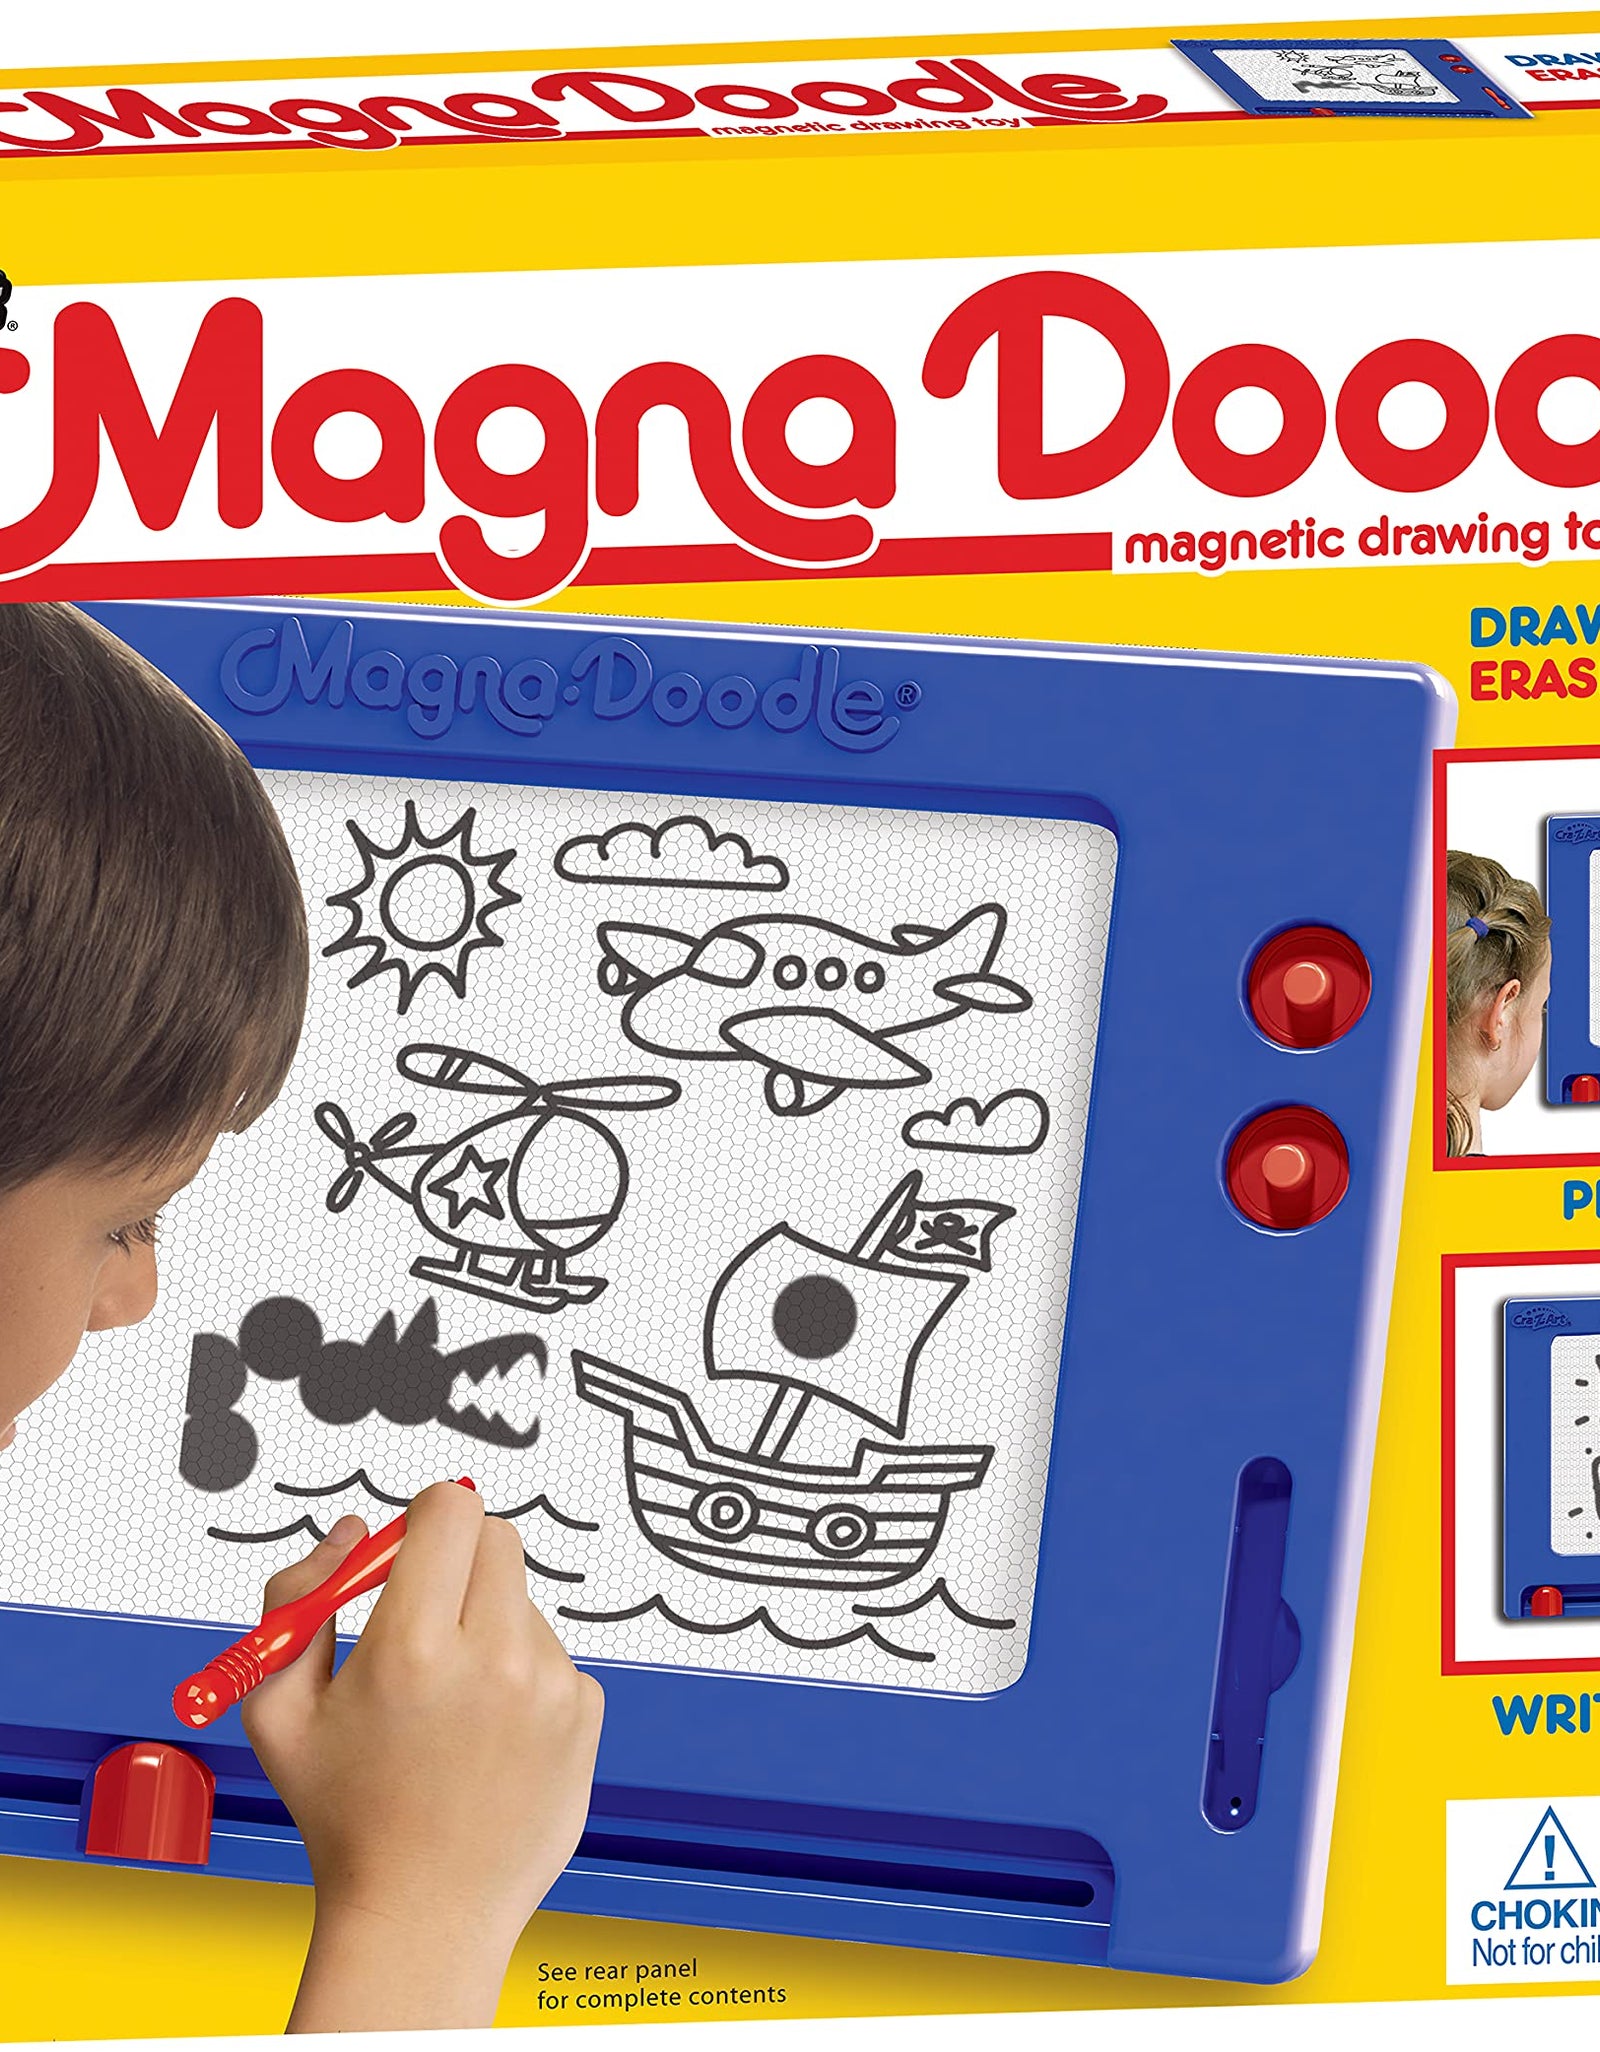 Cra-Z-Art Retro Magna Doodle Magnetic Drawing Board for kids 3 and up, Blue/White